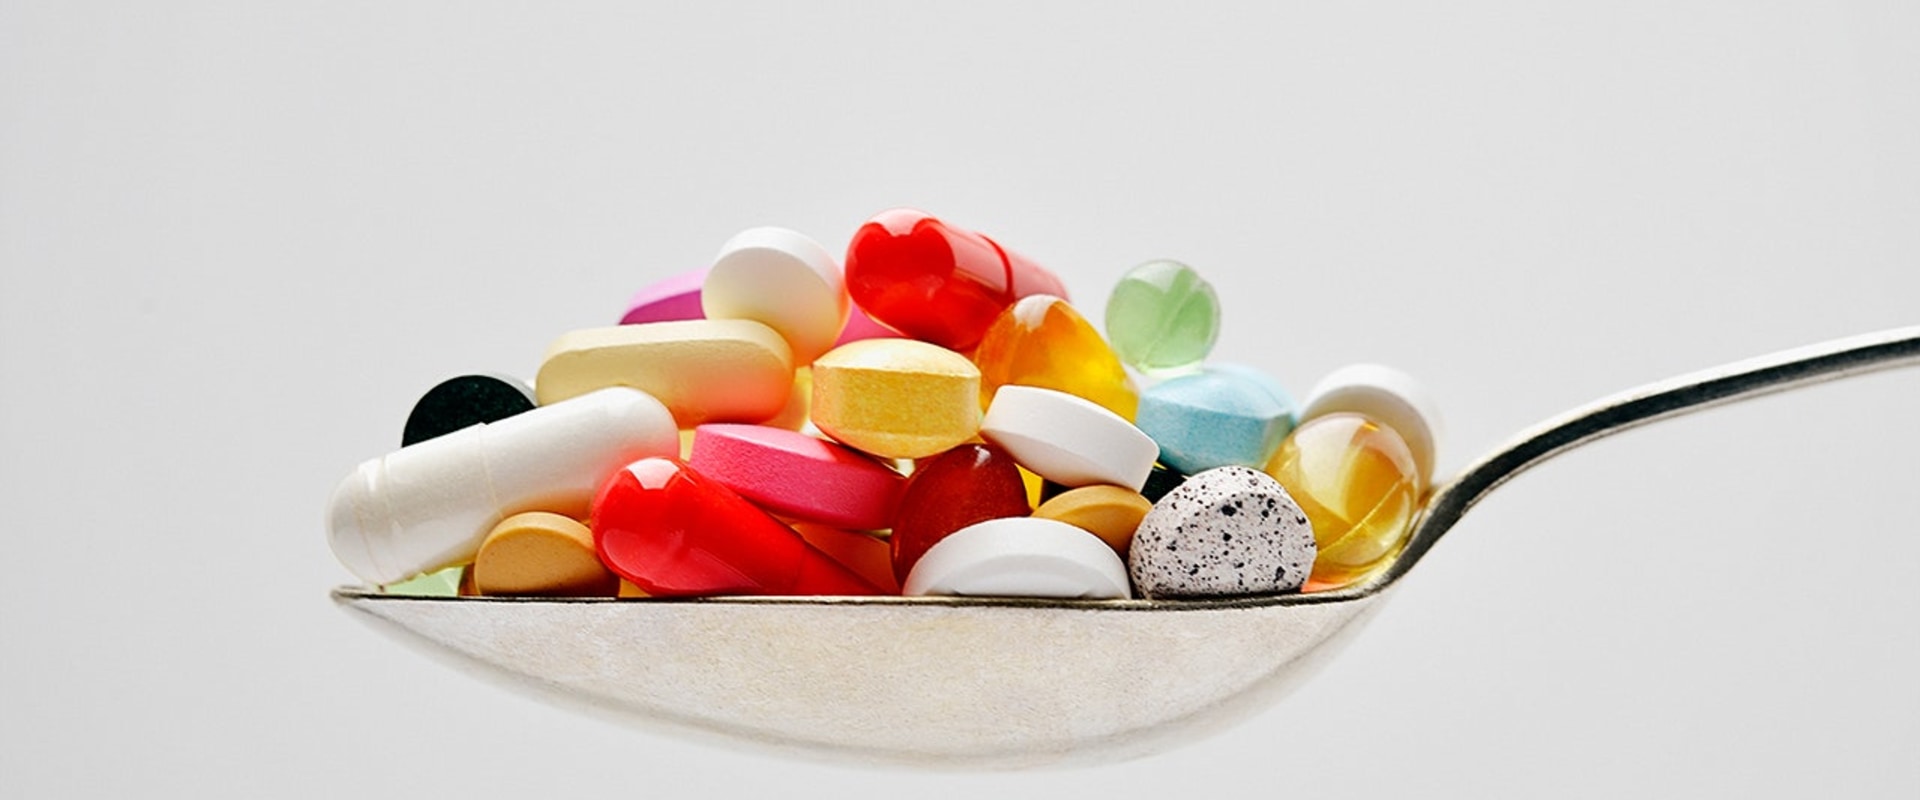 Is it bad to take too many supplements in a day?